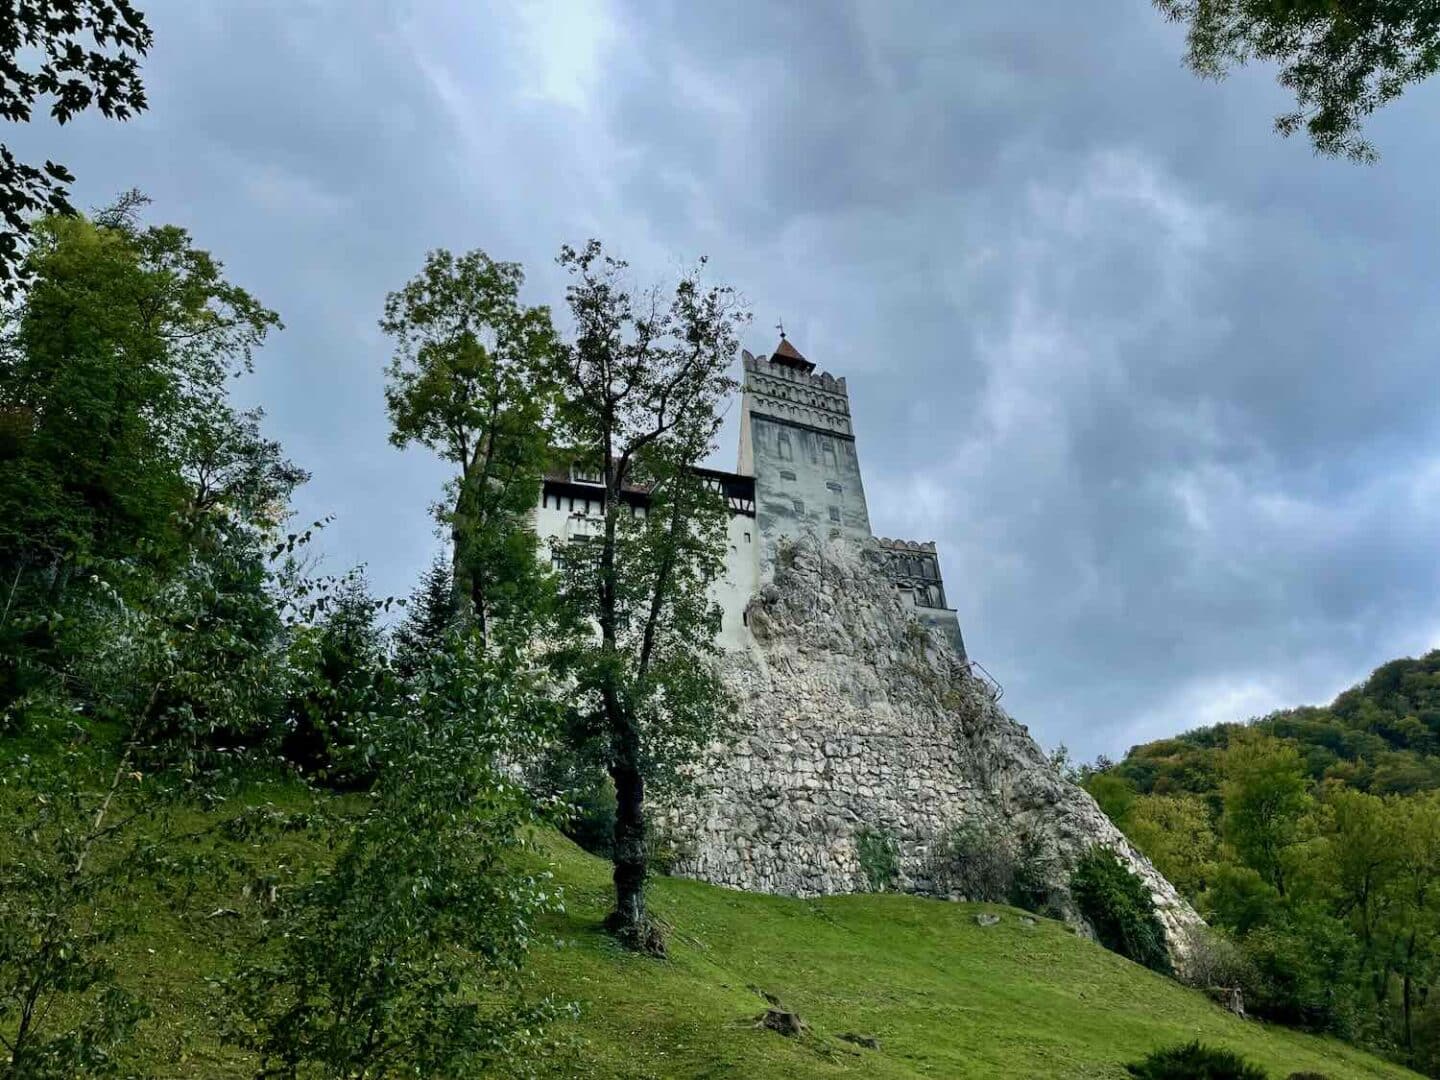 A striking angle of Bran Castle standing atop a steep cliff, surrounded by lush greenery and overshadowed by a moody, cloud-filled sky, enhancing the castle's haunting presence.